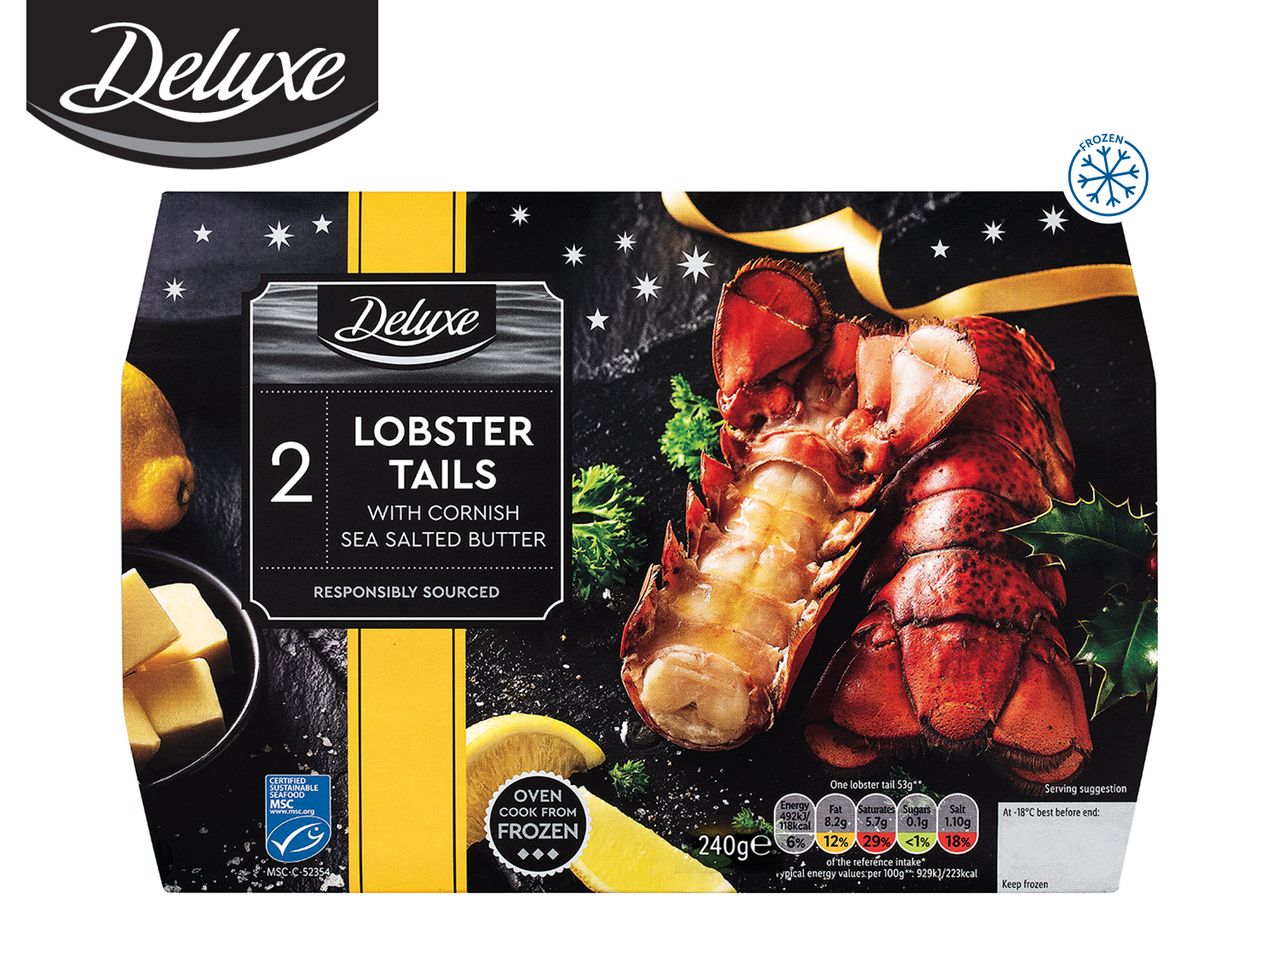 Go to full screen view: Deluxe Lobster Tails with Flavoured Butter - Image 1